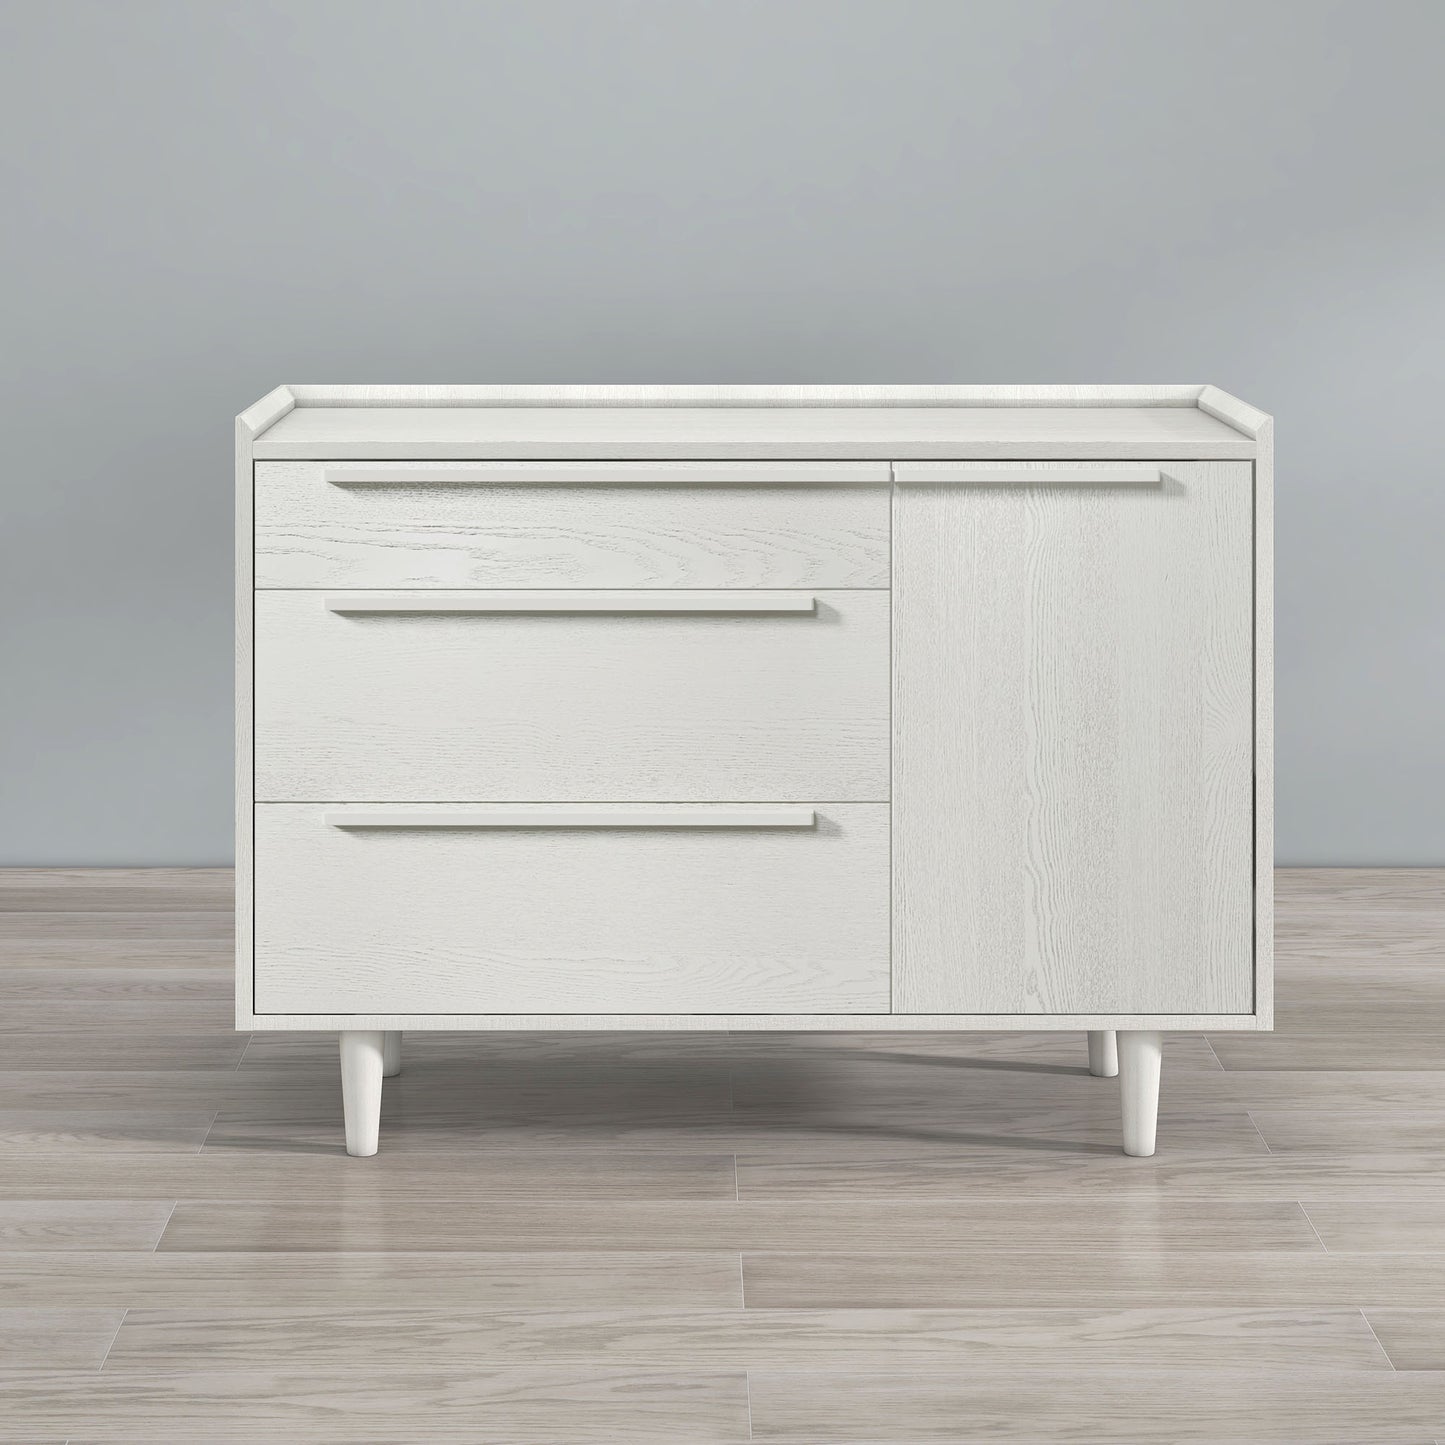 Modern Wood Grain Sideboard with 3 Drawers Storage Cabinet Entryway Floor Cabinet Sideboard Dresser with Solid Wood Legs for bedroom and living room , Grain White